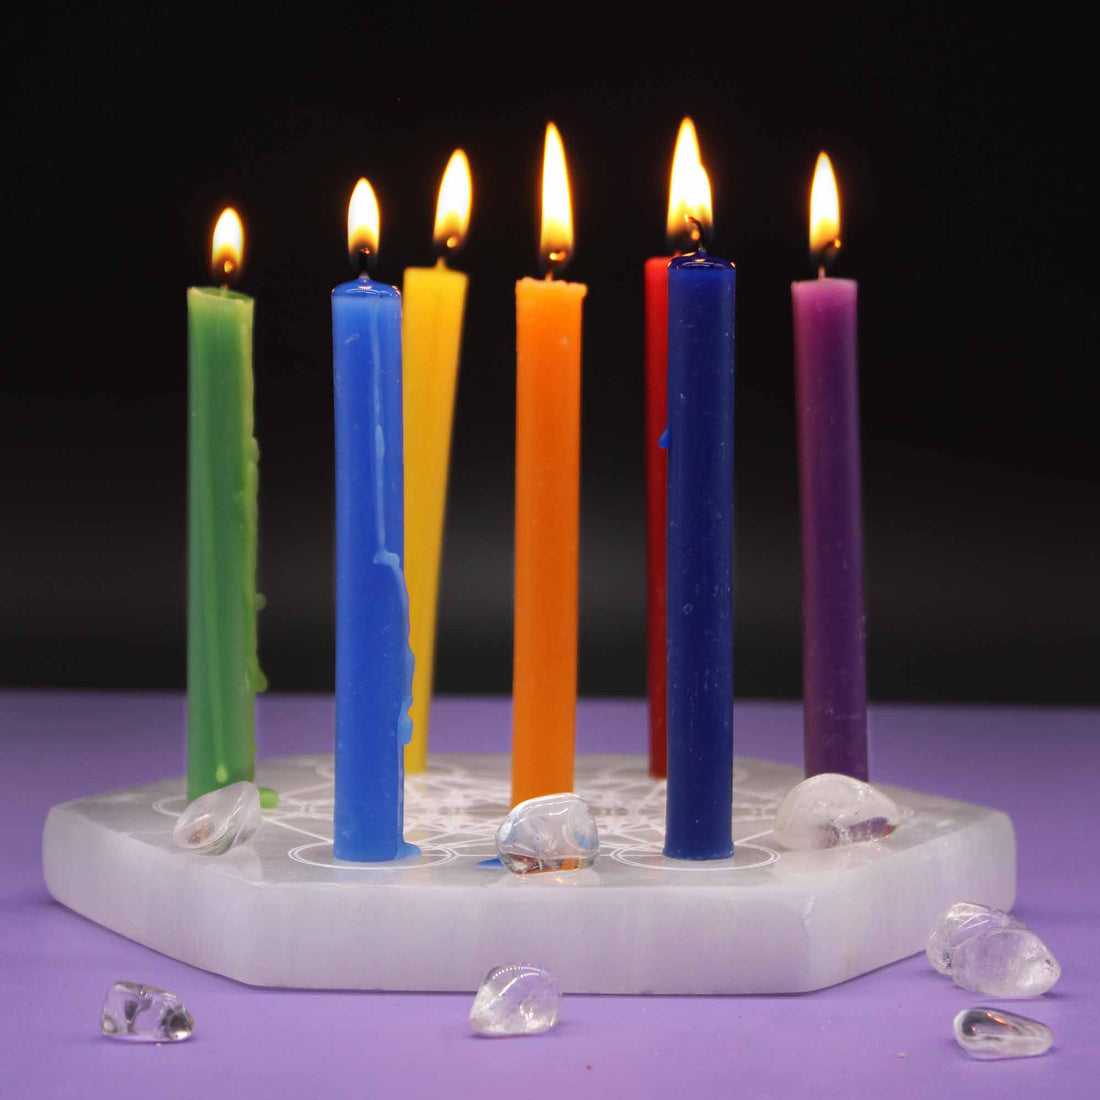 Set of 10 Spell Candles - Clensing - best price from Maltashopper.com SCAND-05